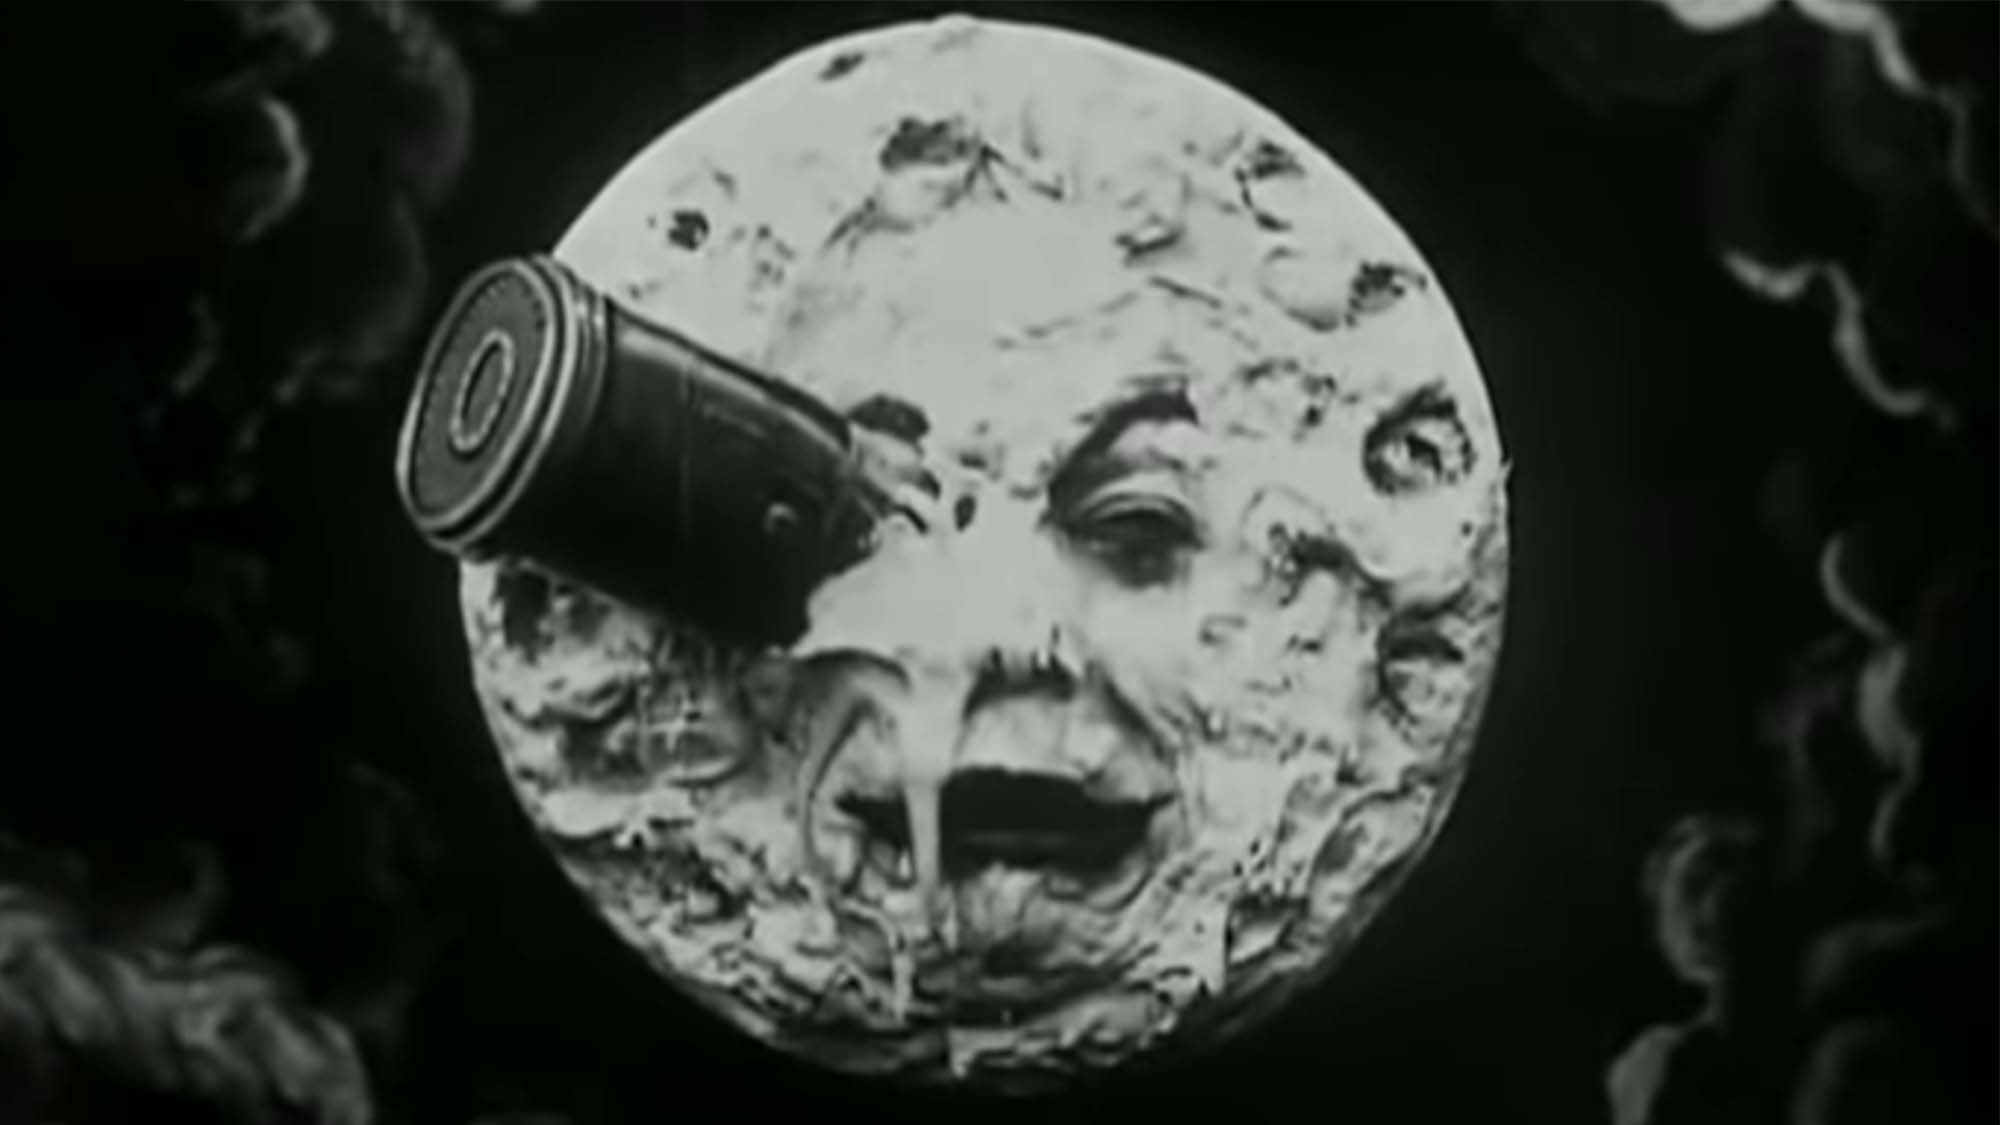 The man in the moon hit in the eye by an artillery shell fired from Earth